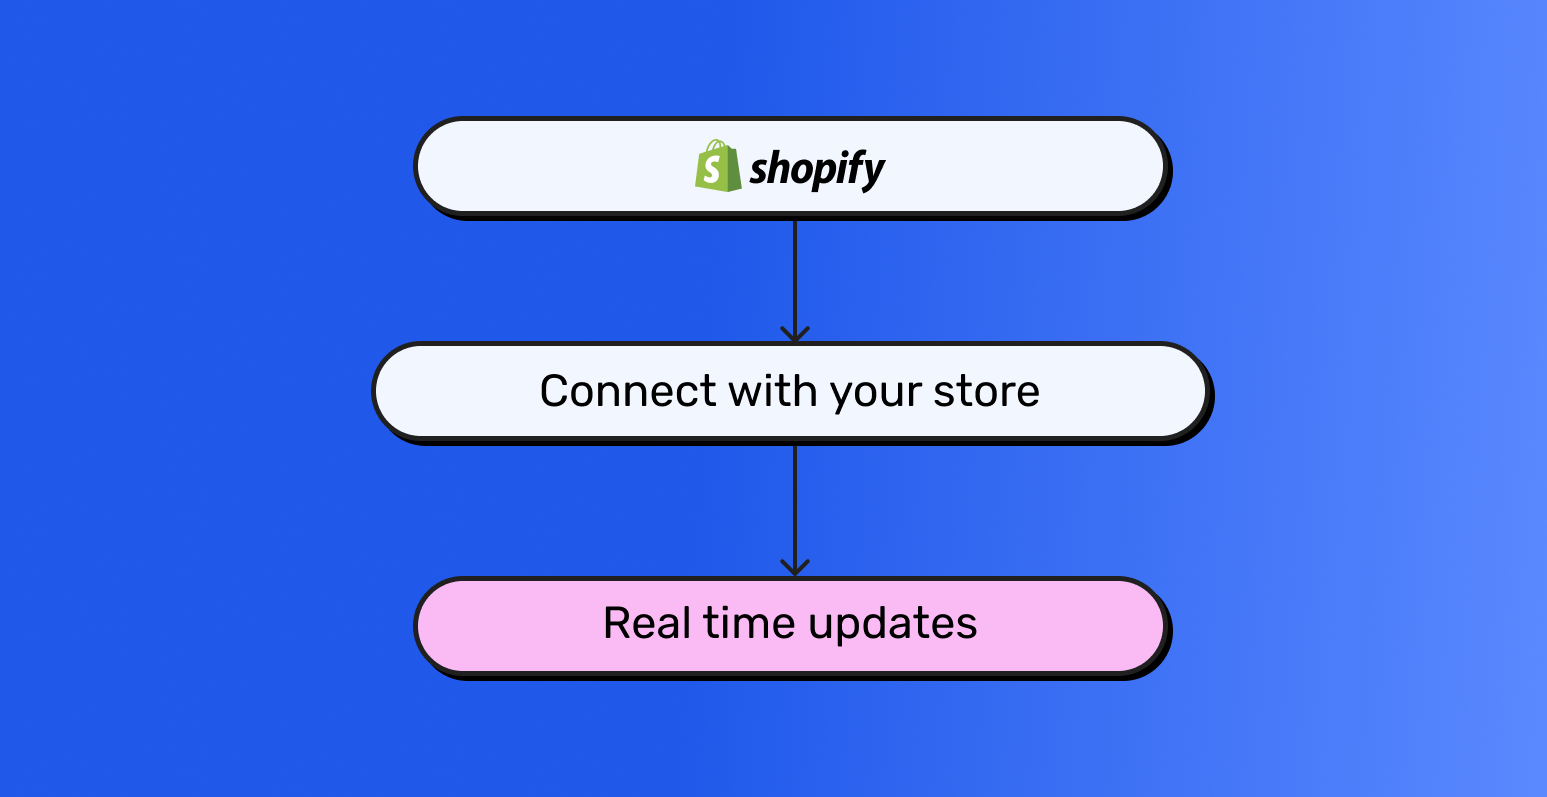 This image features a flow chart that starts with 'Shopify', followed by 'Connect with your store', and ends with 'Real-time updates'. 